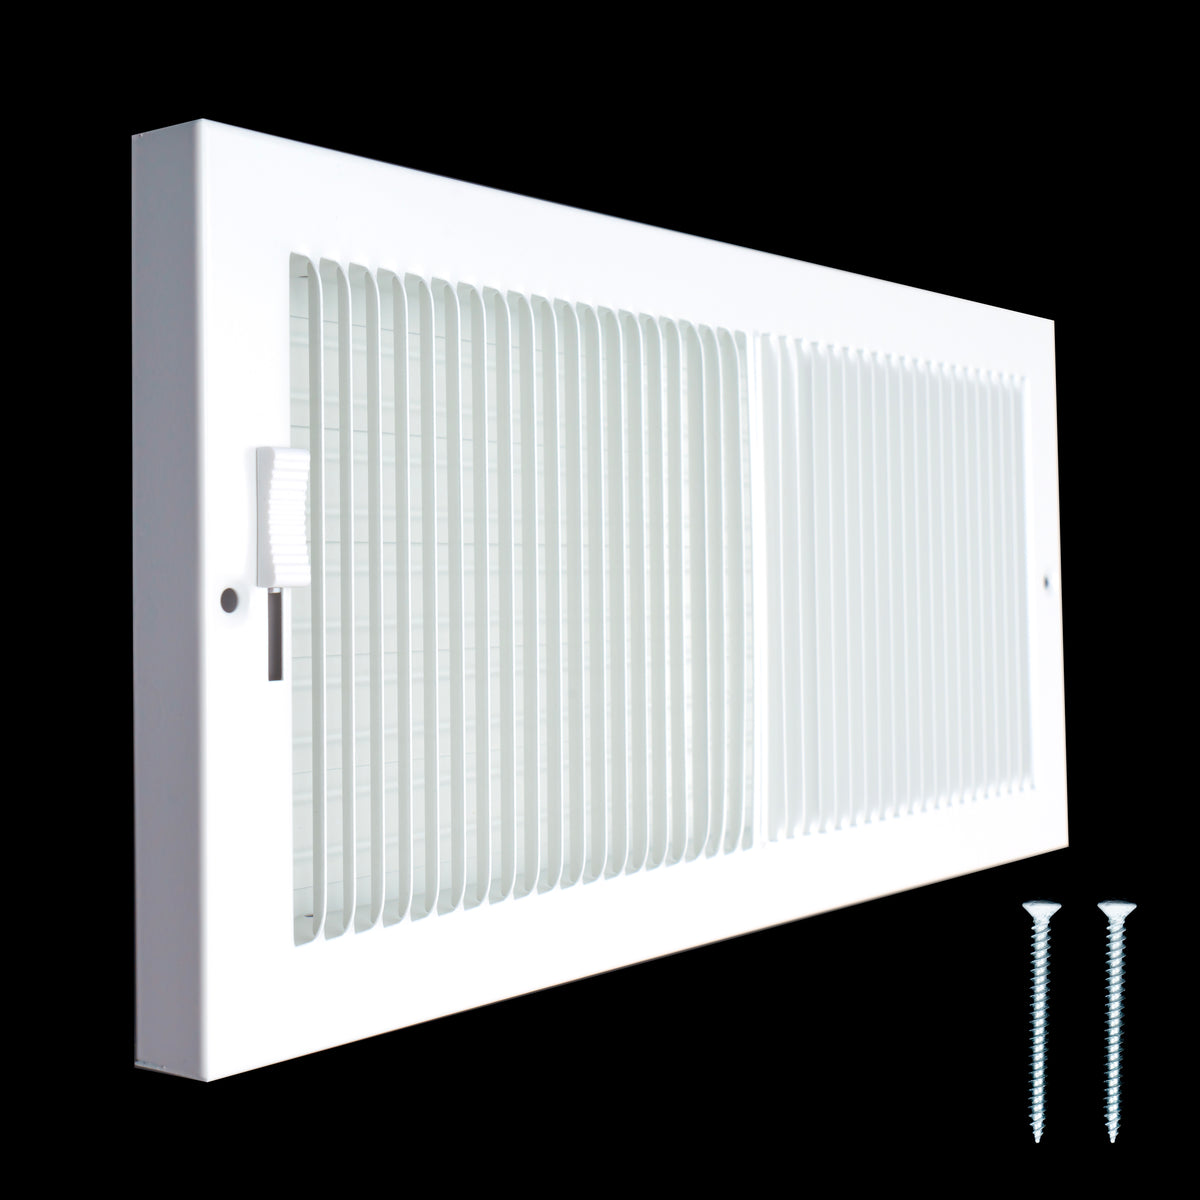 14"W x 6"H [Duct Opening] Steel Baseboard Air Supply Grille with Multi-shutter Damper | White | Outer Dimensions: 14-1/4" x 7-1/4"